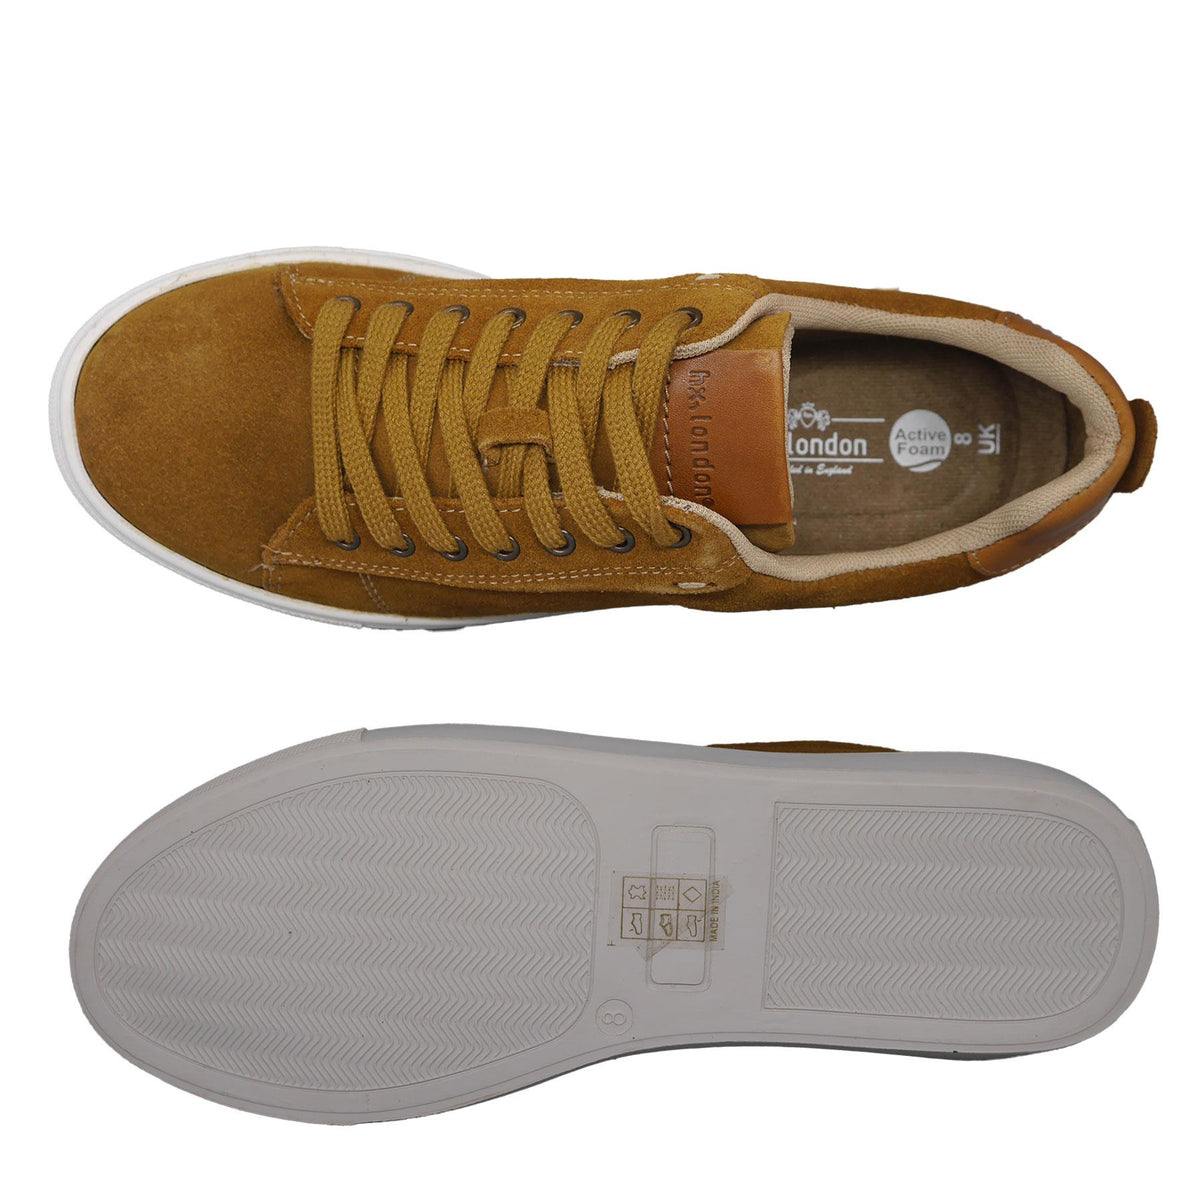 Romford Suede Smart Casual Lace Up Trainers